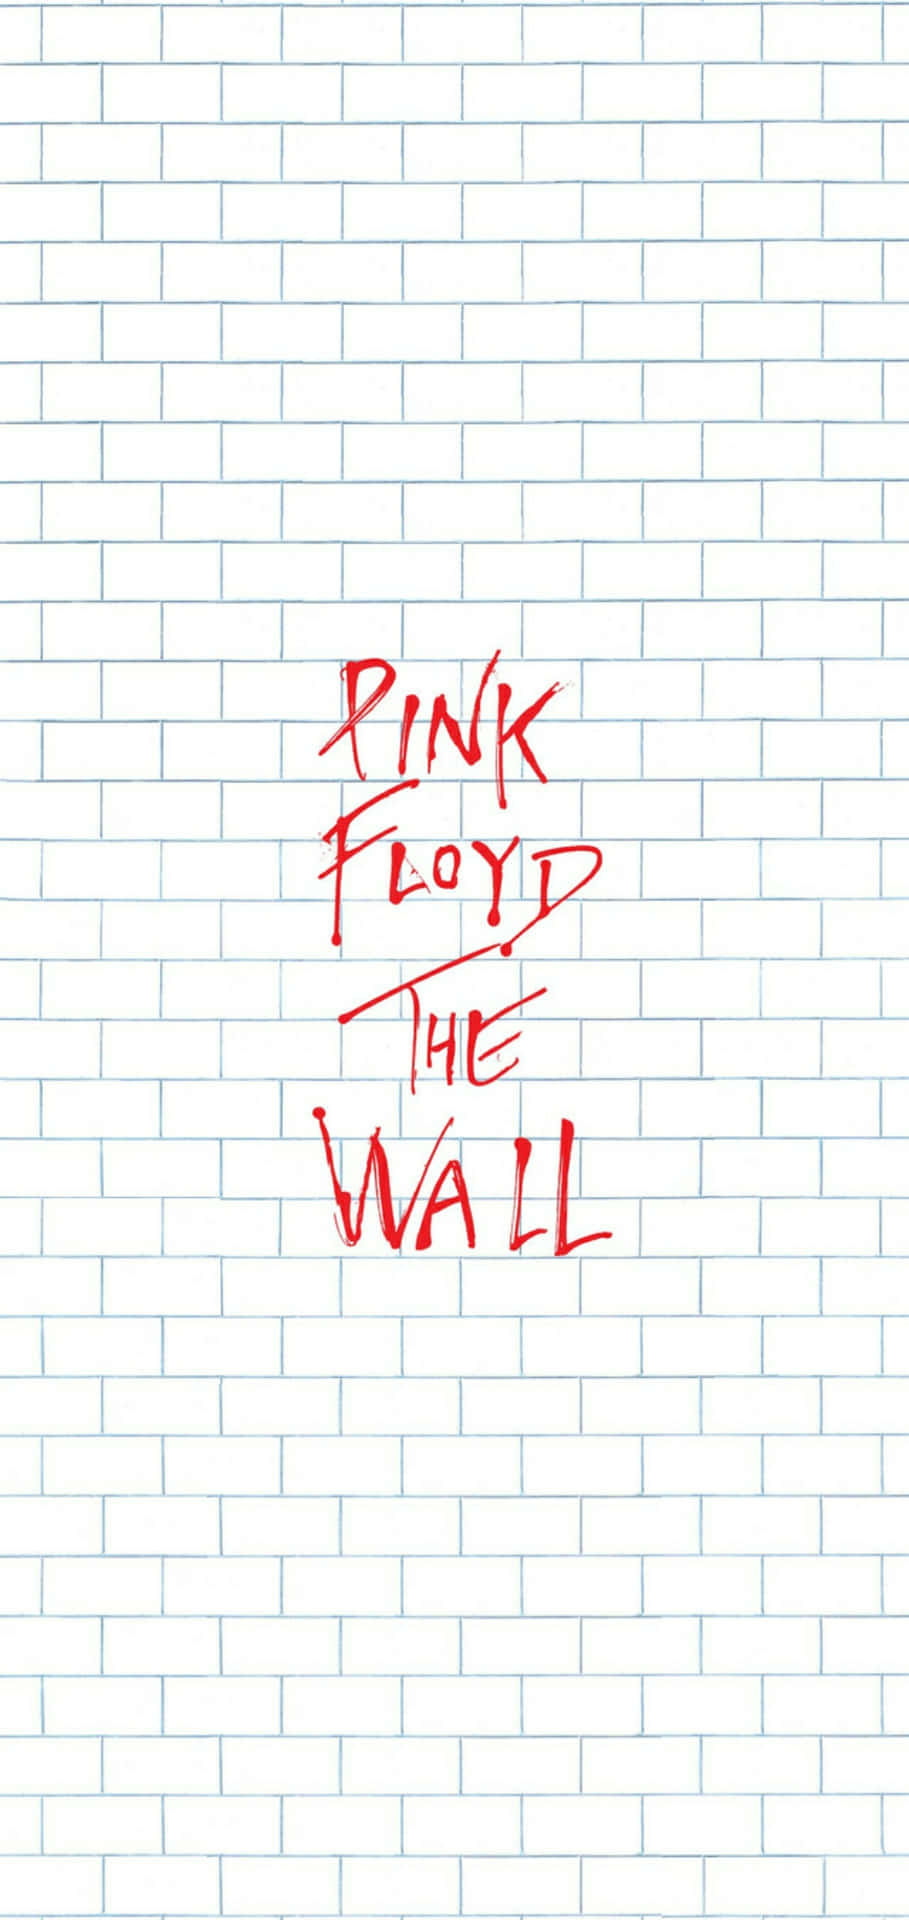 Red Pink Floyd The Wall Wallpaper